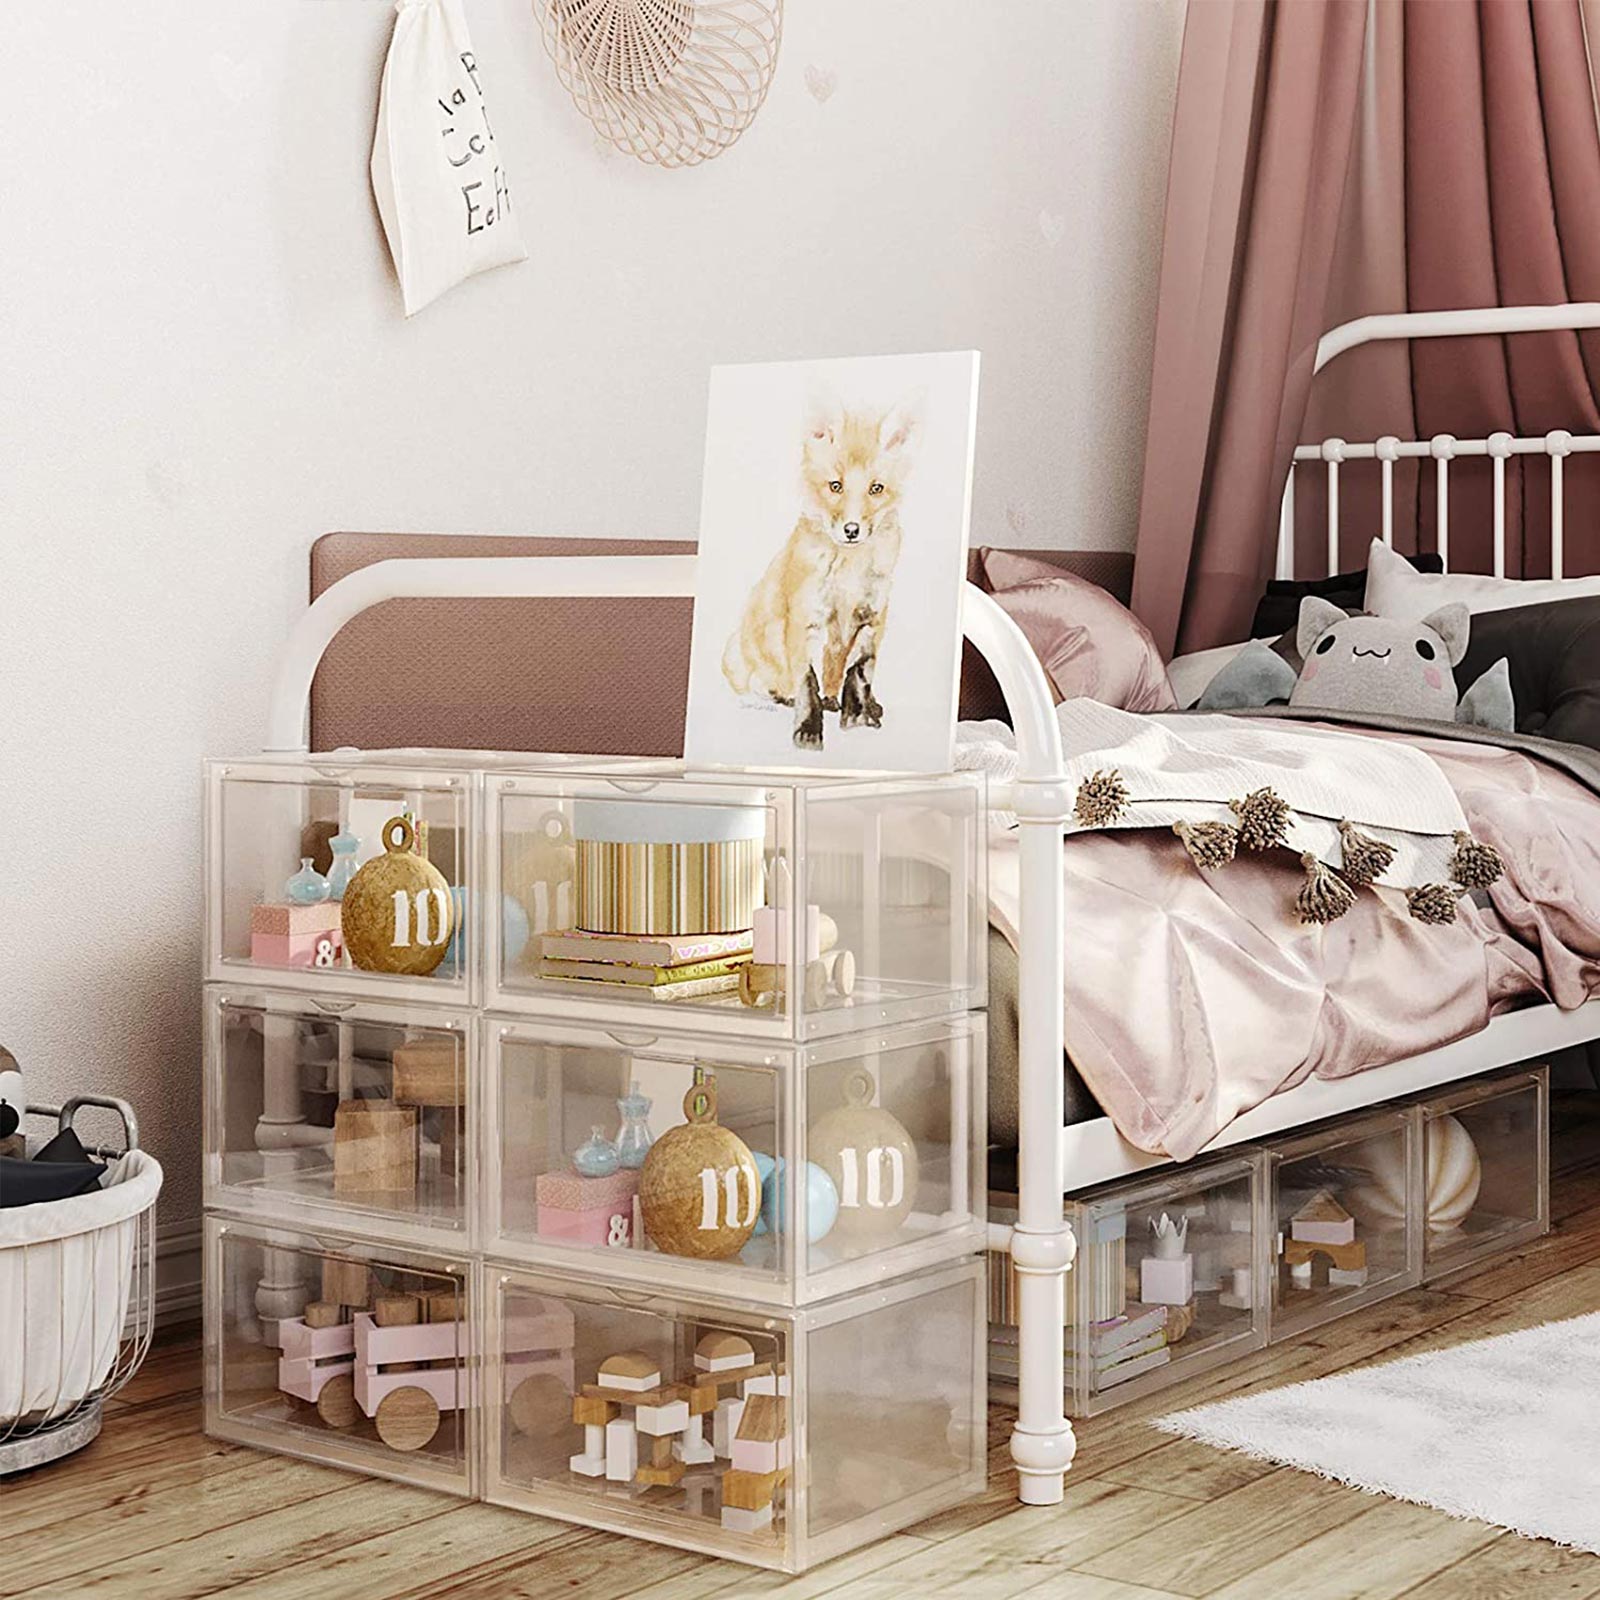 Set of 6 Transparent Shoe Boxes with Doors | Home Storage ...